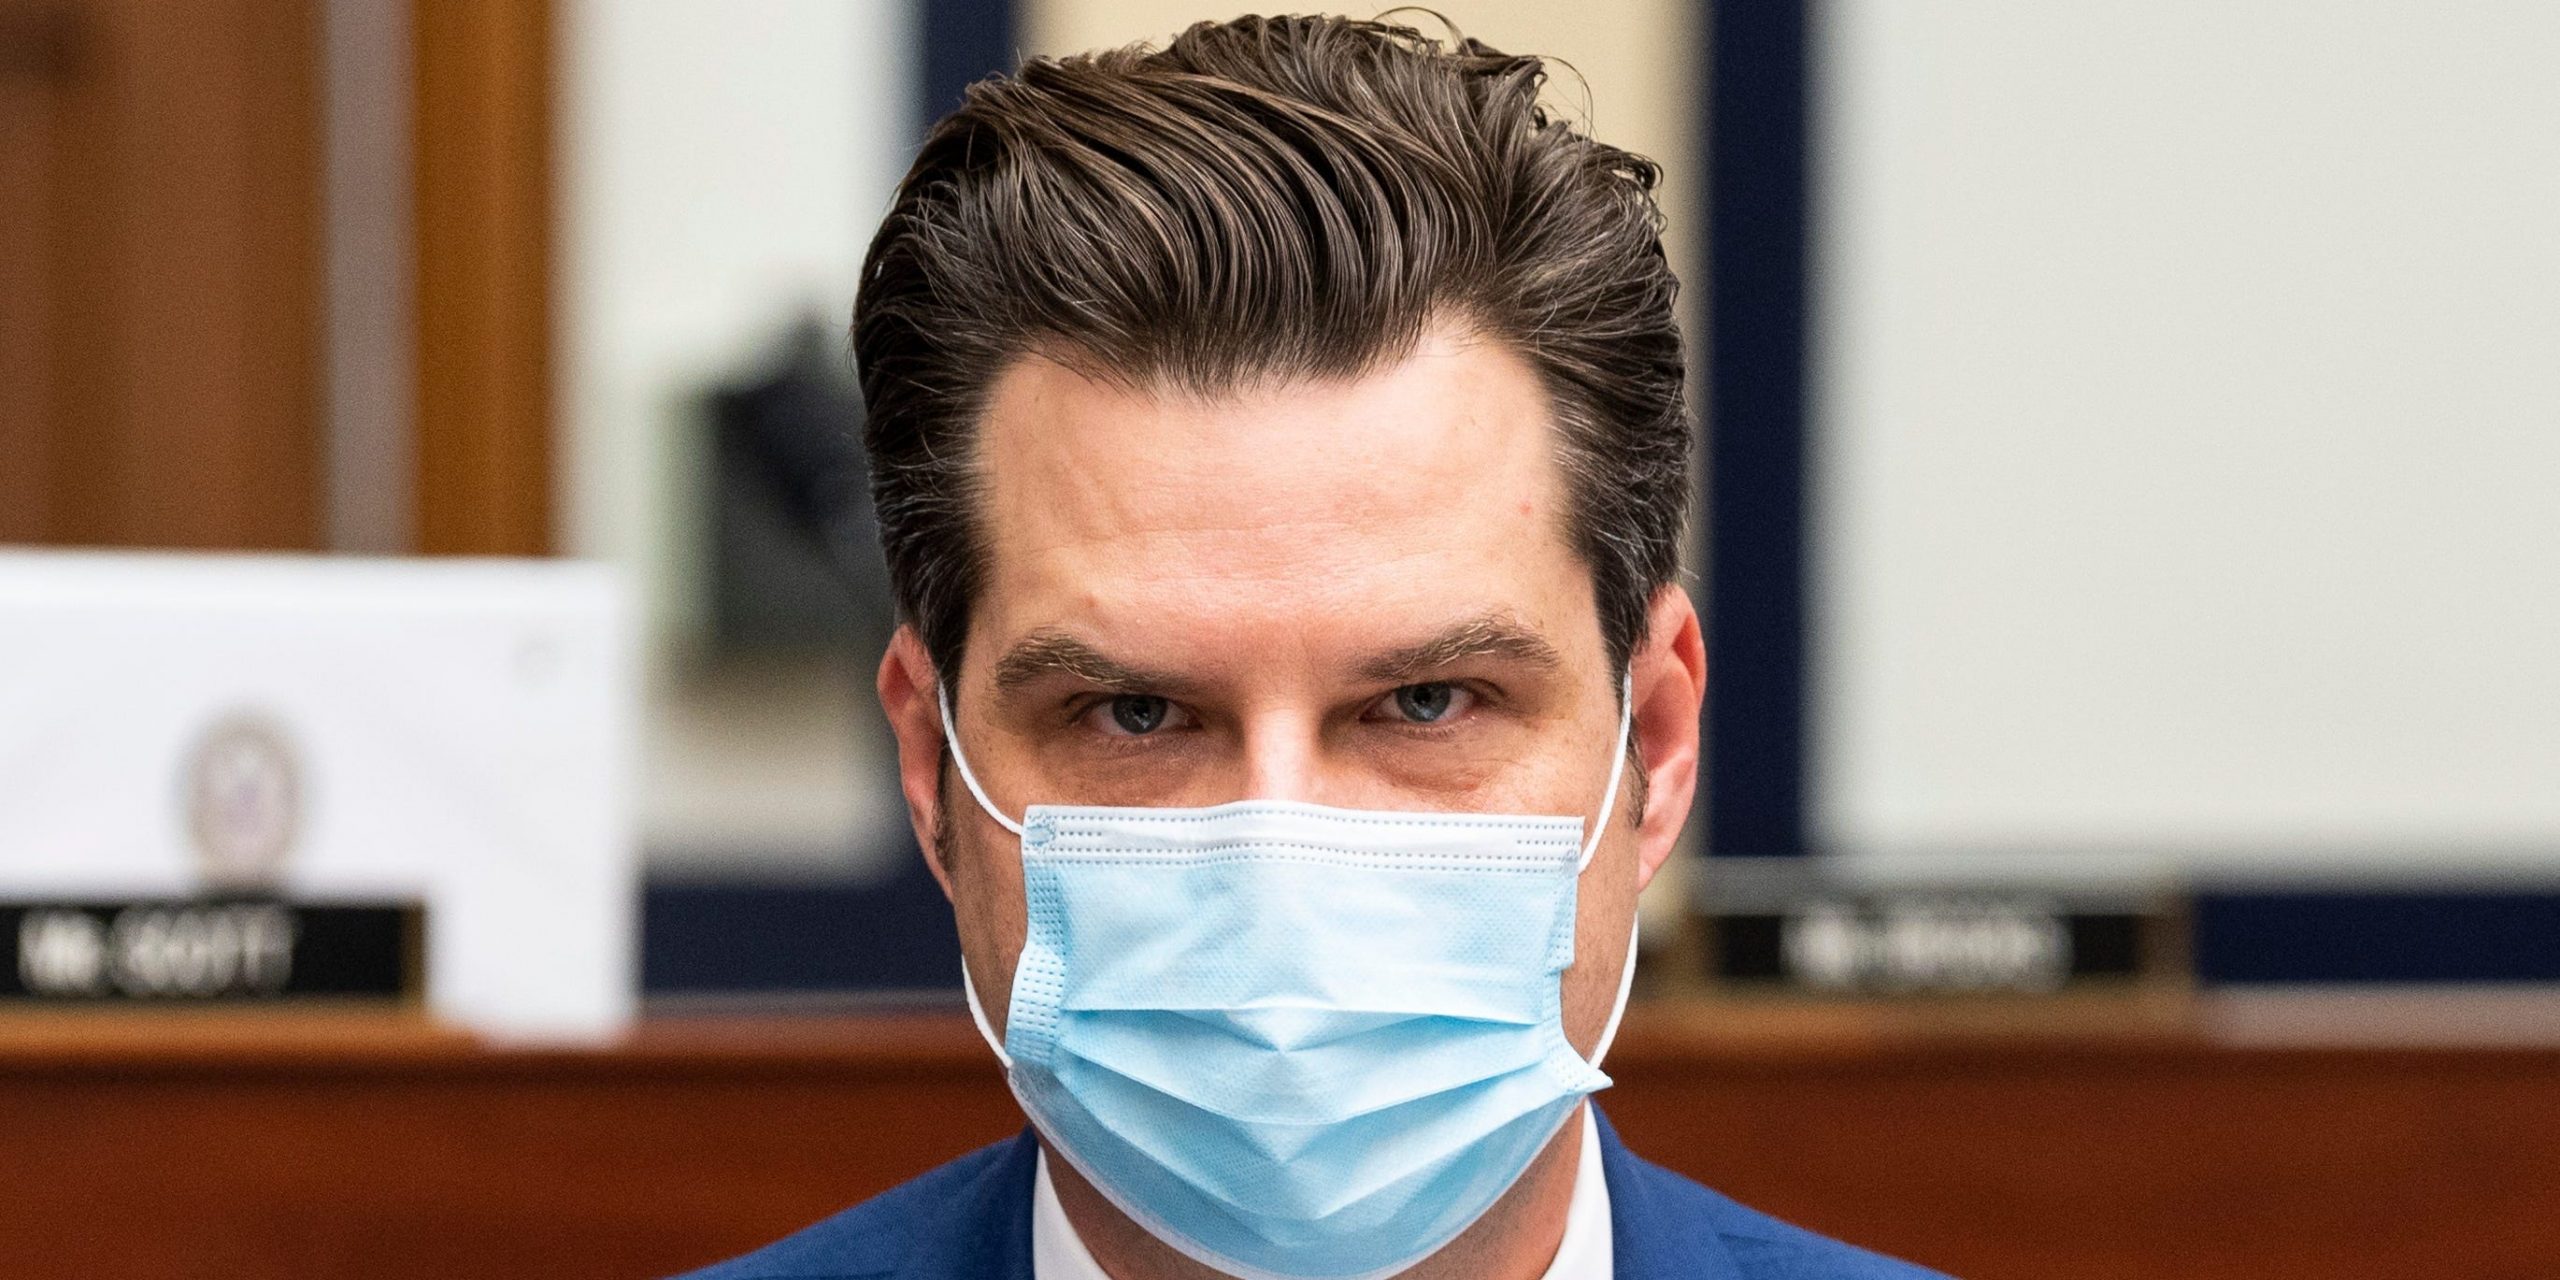 Republican Rep. Matt Gaetz of Florida at a markup hearing of the National Defense Authorization Act on Capitol Hill on Wednesday, Sept. 1, 2021.